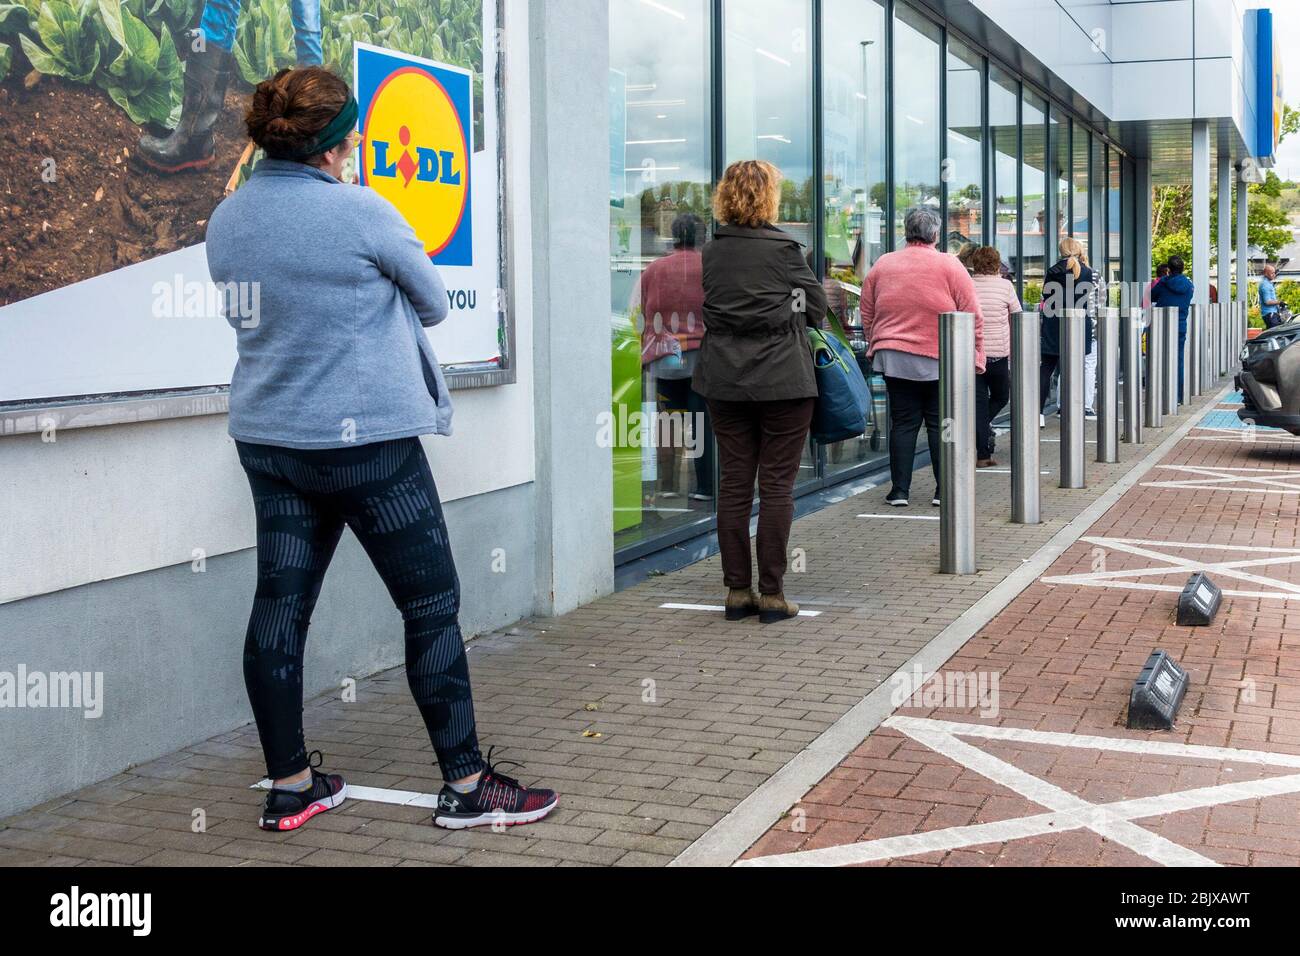 Clonakilty, West Cork, Ireland. 30th Apr, 2020. There was a queue to get into Lidl Supermarket, Clonakilty today to limit the amount of people in the store due to the Covid-19 pandemic. Credit: AG News/Alamy Live News Stock Photo